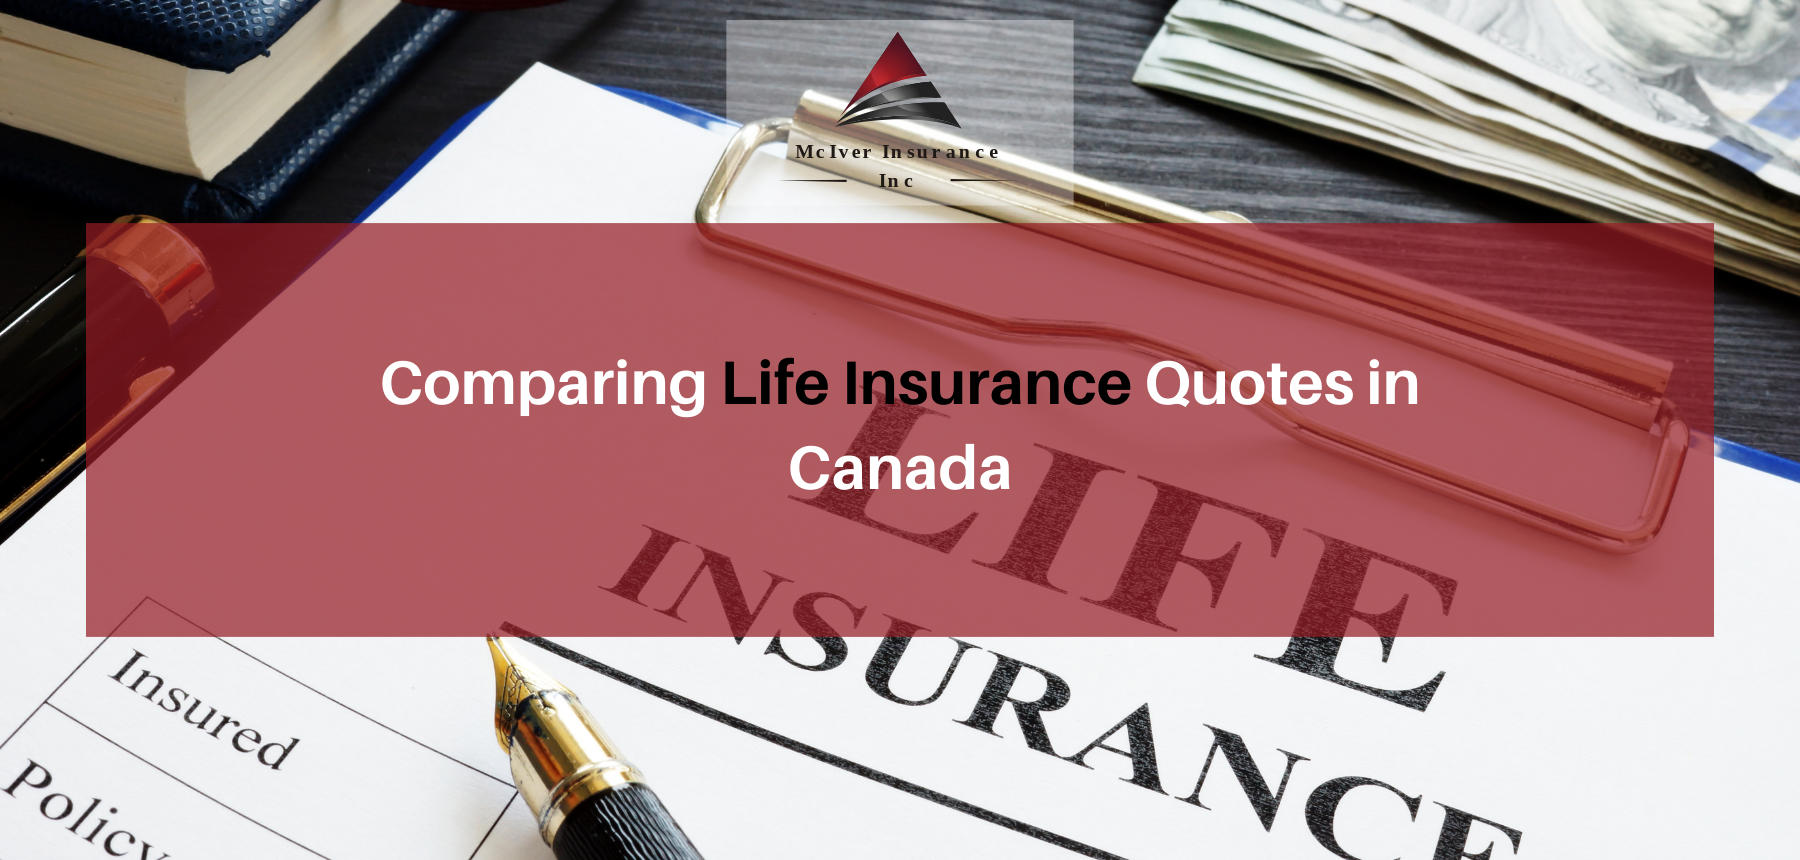 Comparing Life Insurance Quotes in Canada